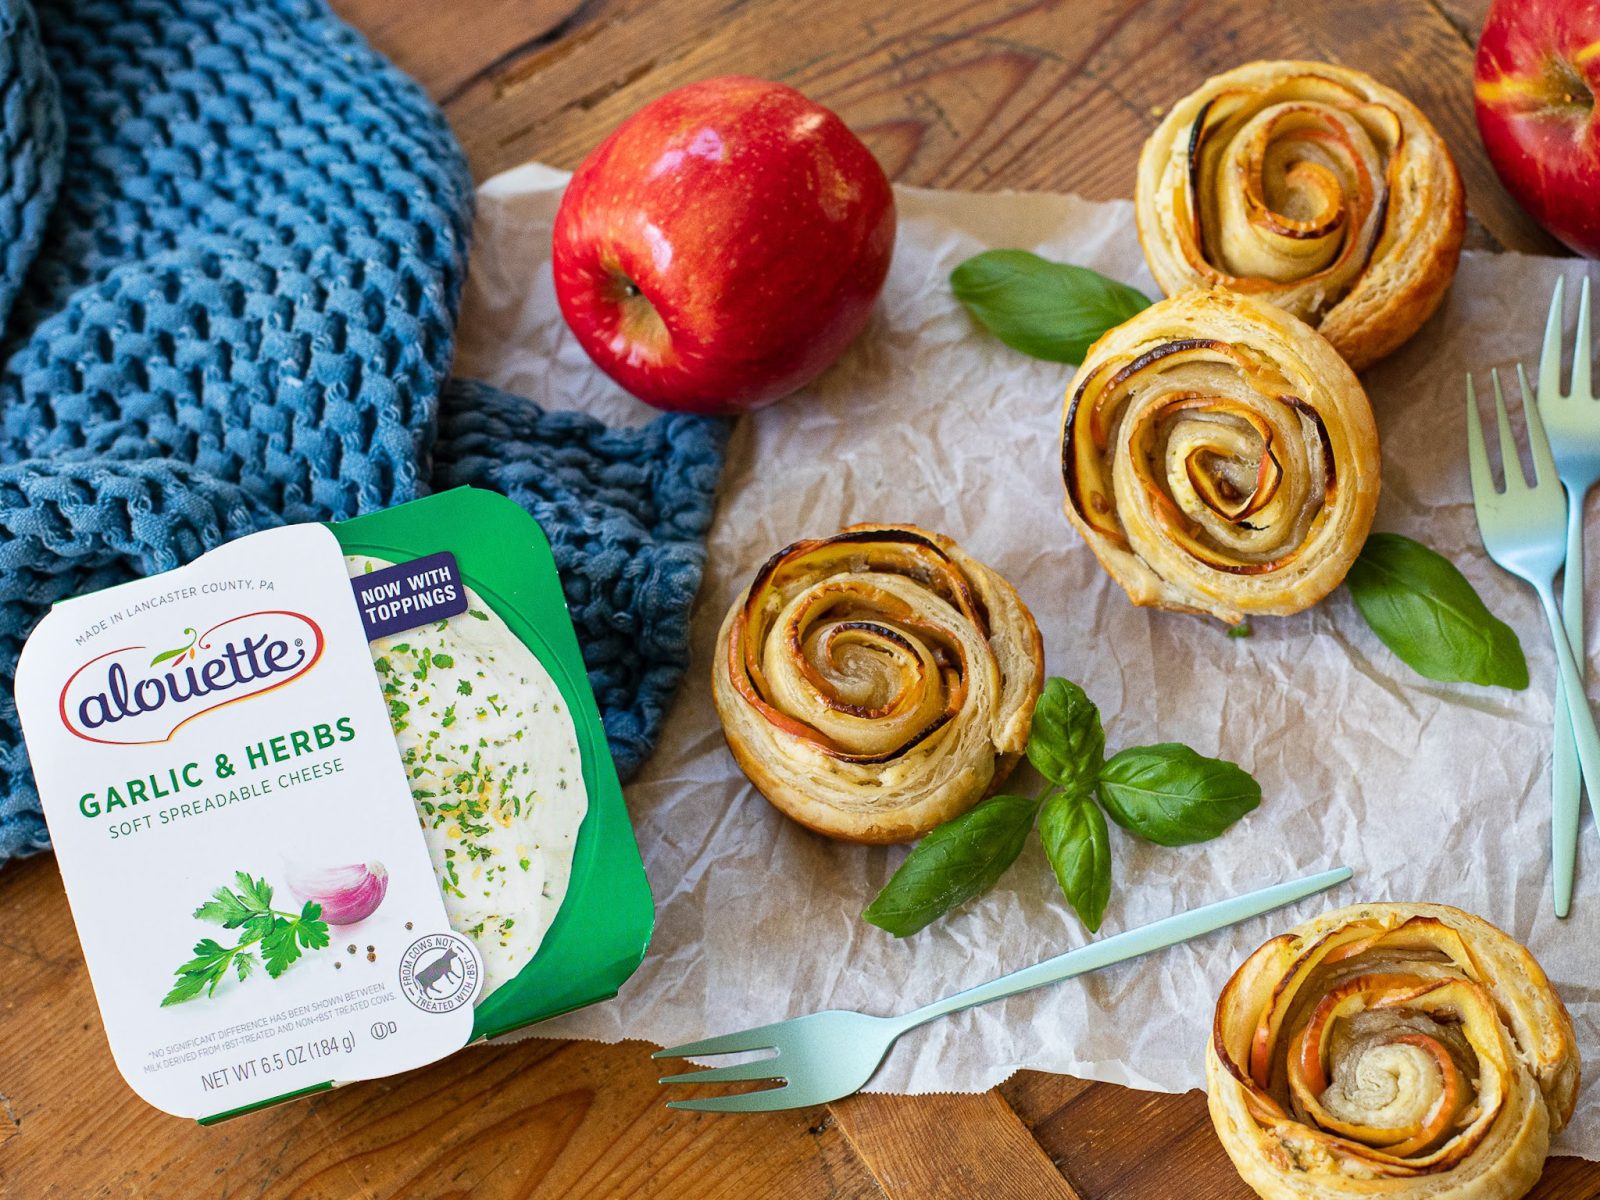 Delight Mom With Elegant Pastry Roses Made With alouette Cheese For Mother’s Day!